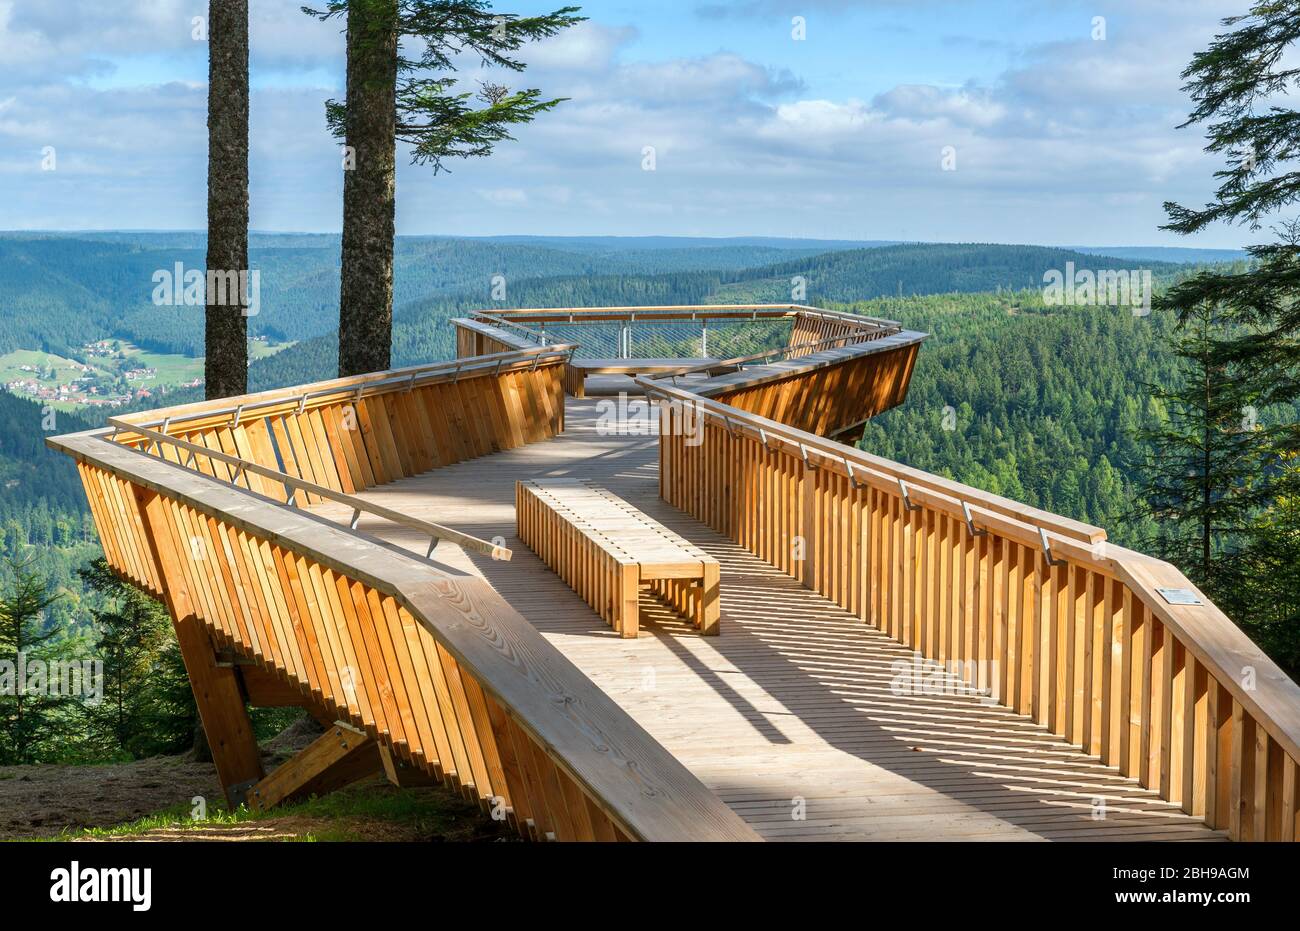 Germany, Baden-Württemberg, Freudenstadt-Kniebis, Ellbachseeblick, observation deck overlooking the Ellbachsee, a glacial Karsee in the northern Black Forest. The new observation deck, a 30m long barrier-free Douglas fir dock, 10m above the ground at the end, opened in August 2013. Stock Photo